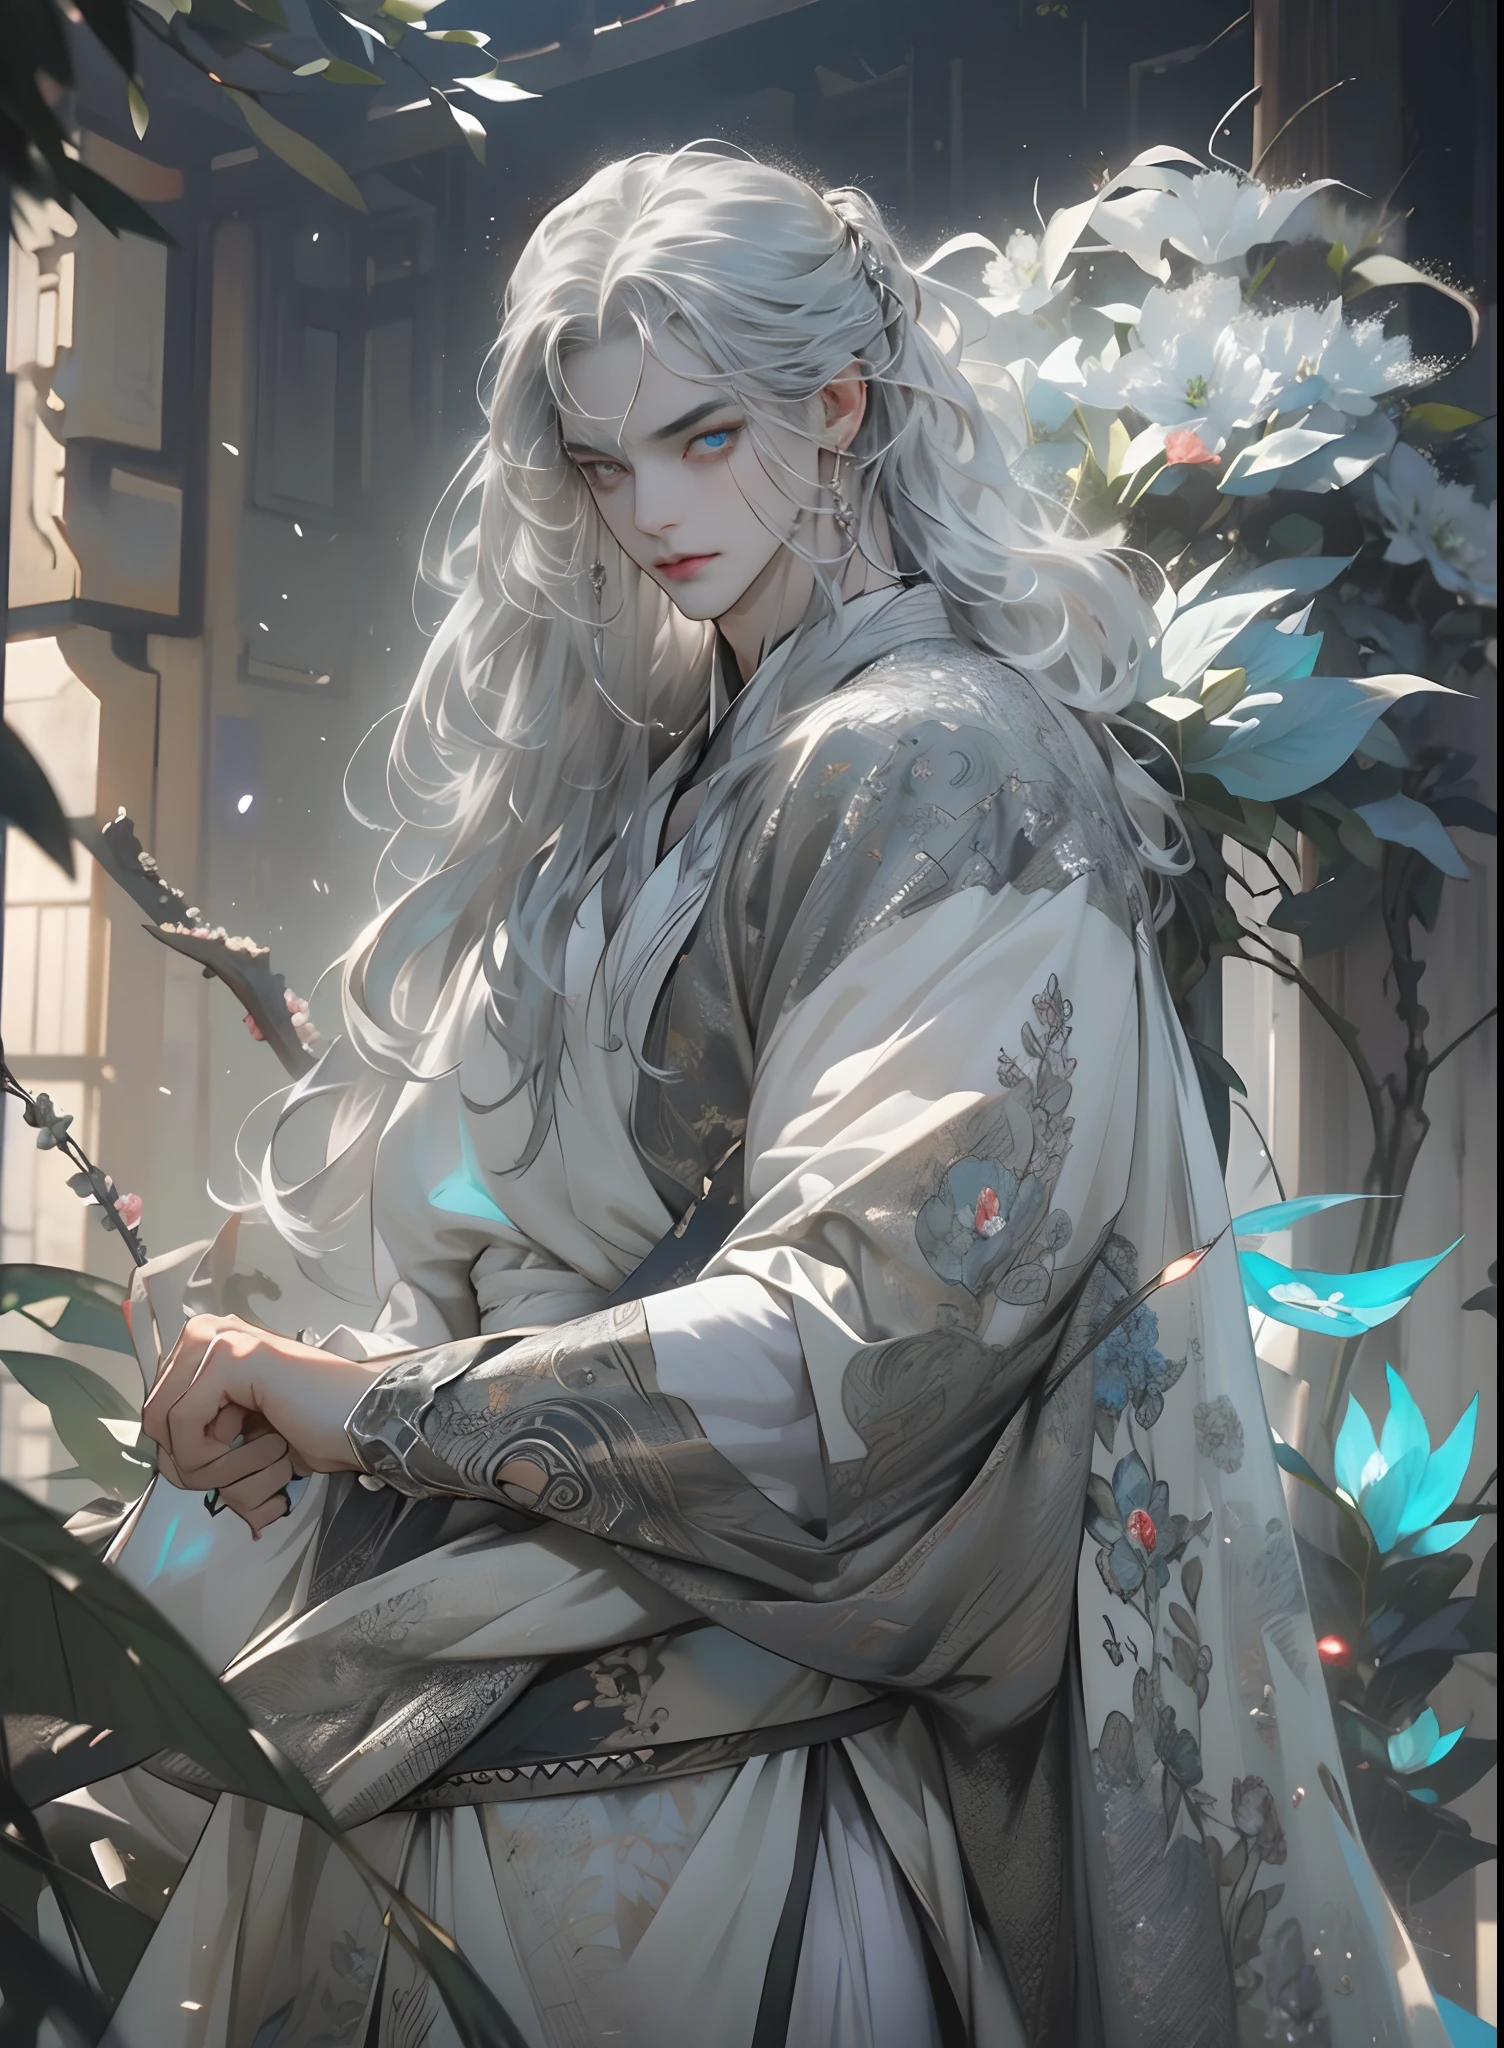 (extreamly delicate and beautiful:1.2), 8K, (tmasterpiece, best:1.0), , (LONG_silver_HAIR_MALE:1.5), Upper body body, a long_haired male, cool and seductive, evil_gaze, wears opened hanfu, half-nudity_chest and intricate detailing, and intricate detailing, finely ((Perfect symmertical eyes:1.5)) and detailed face, Perfect eyes, Equal eyes, Fantastic lights and shadows、white room background、 Uses backlight and rim light